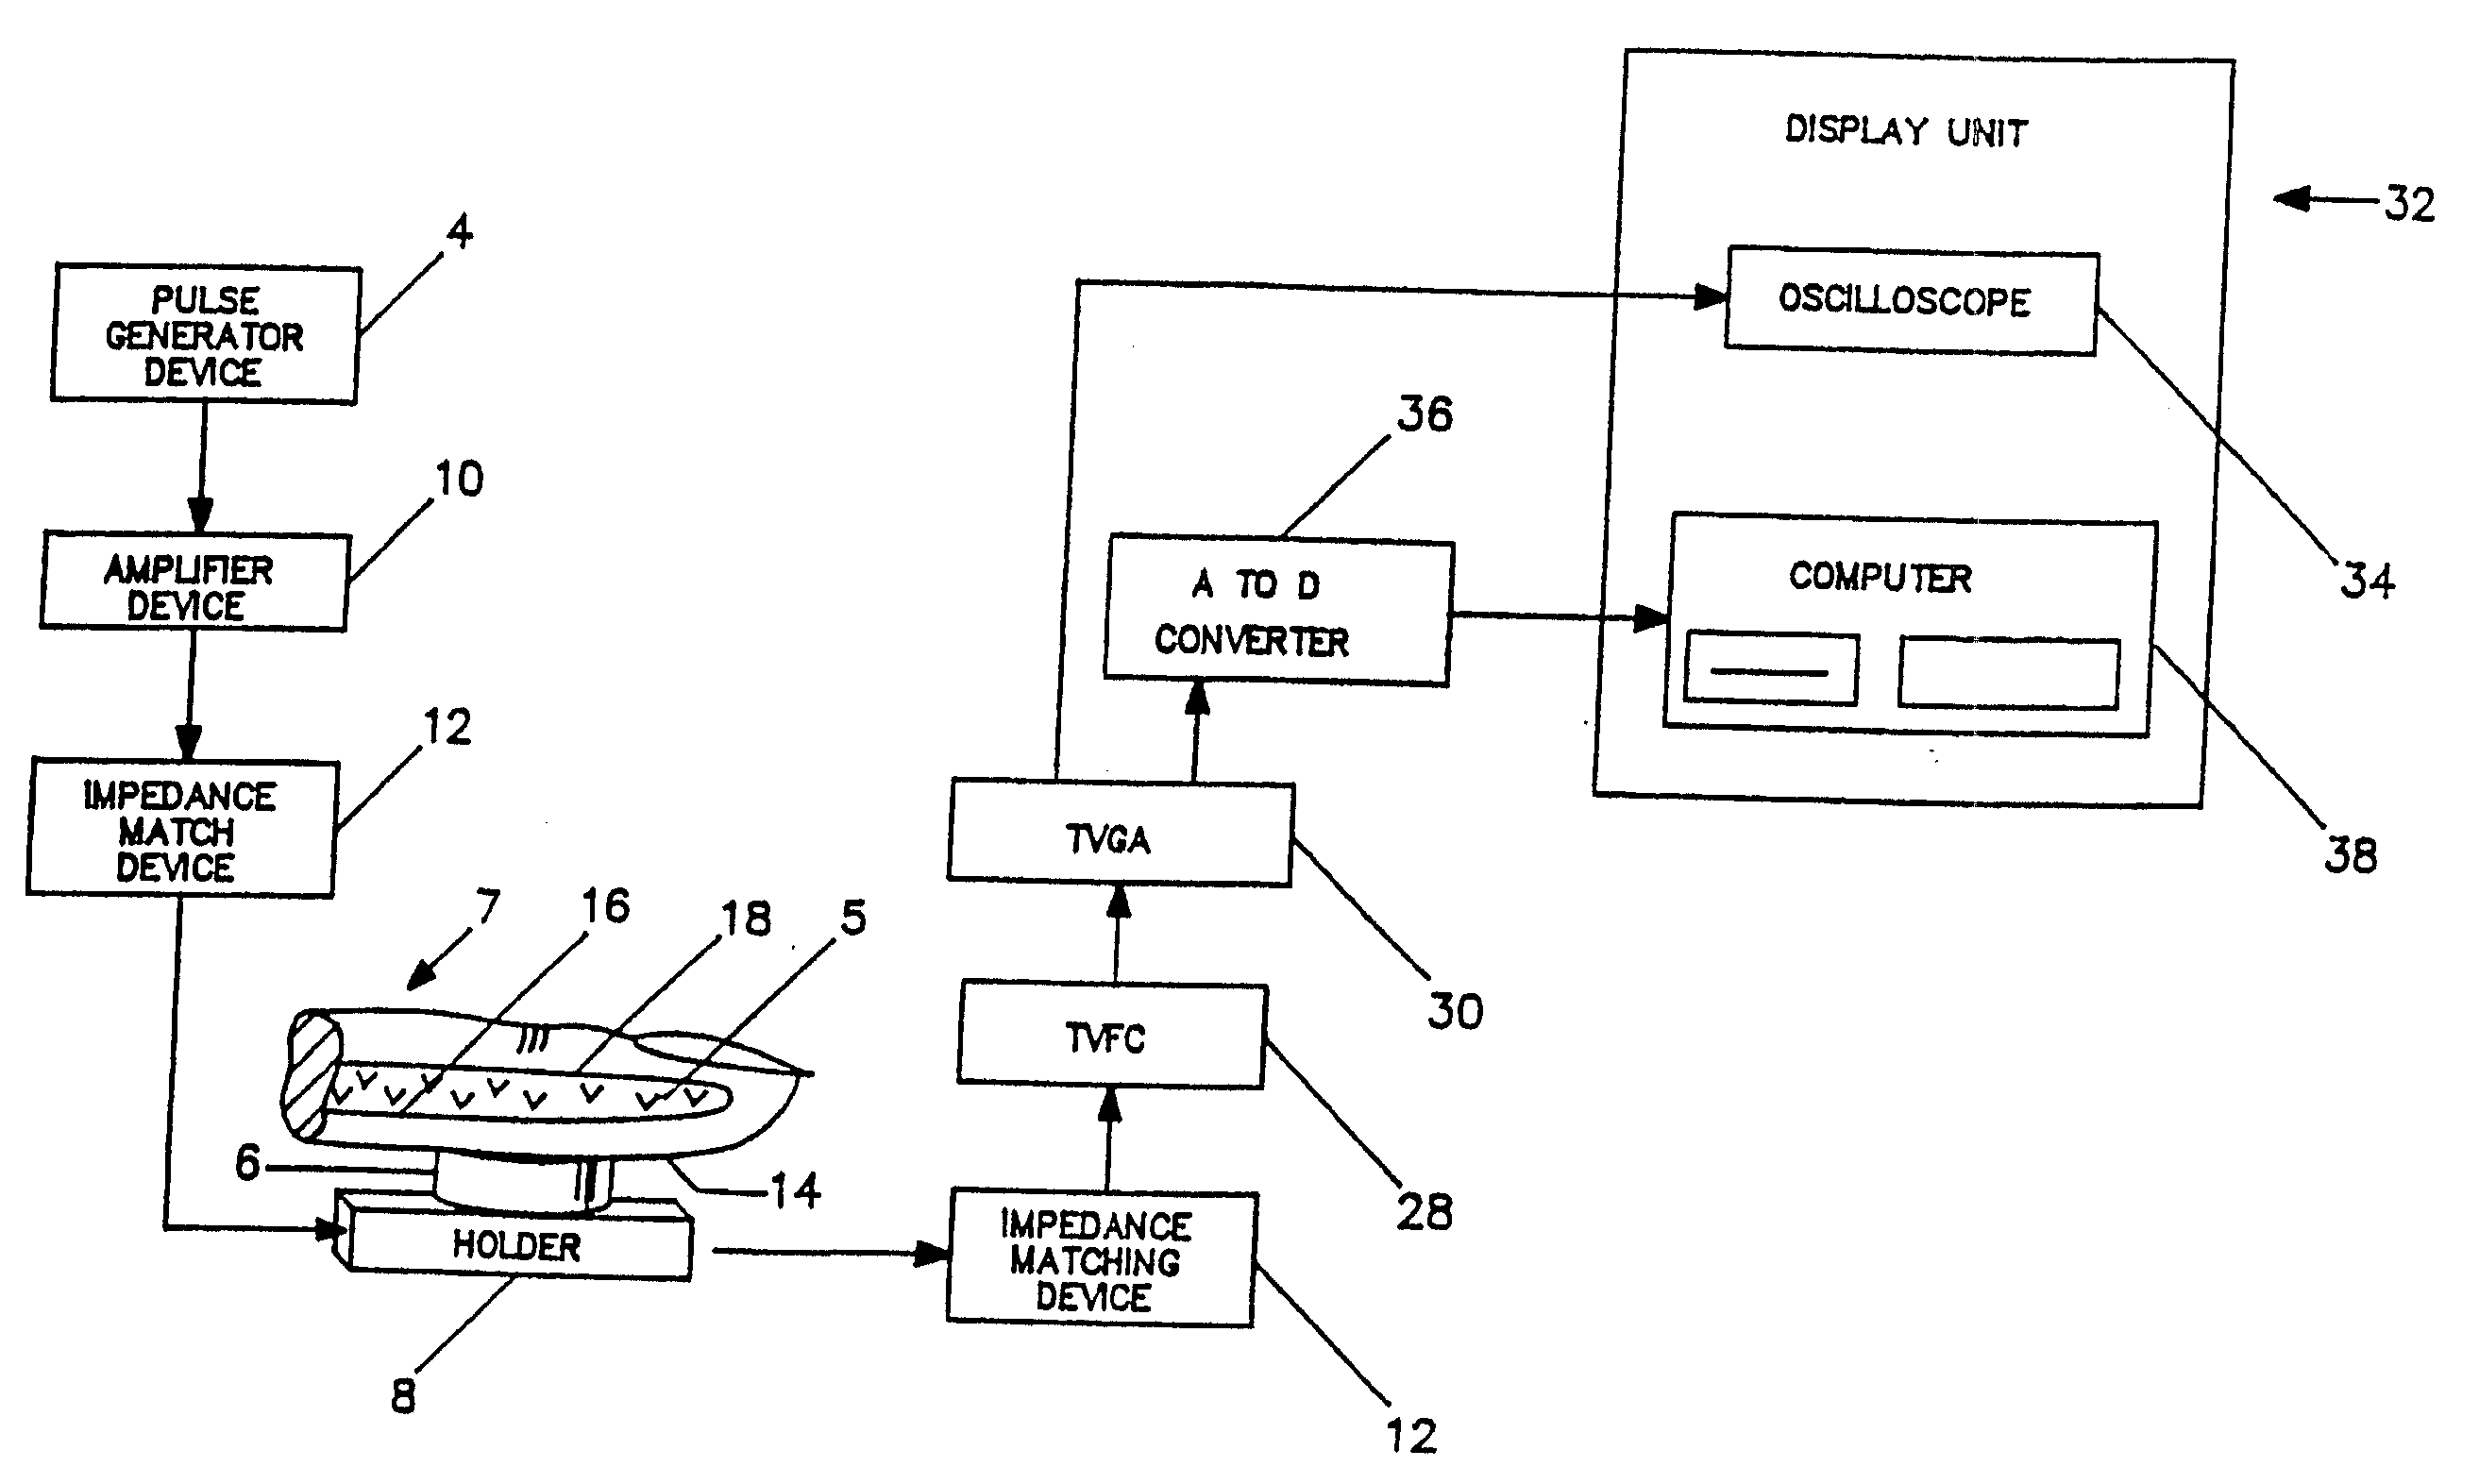 Method and system for biometric recognition using unique internal distinguishing characteristics